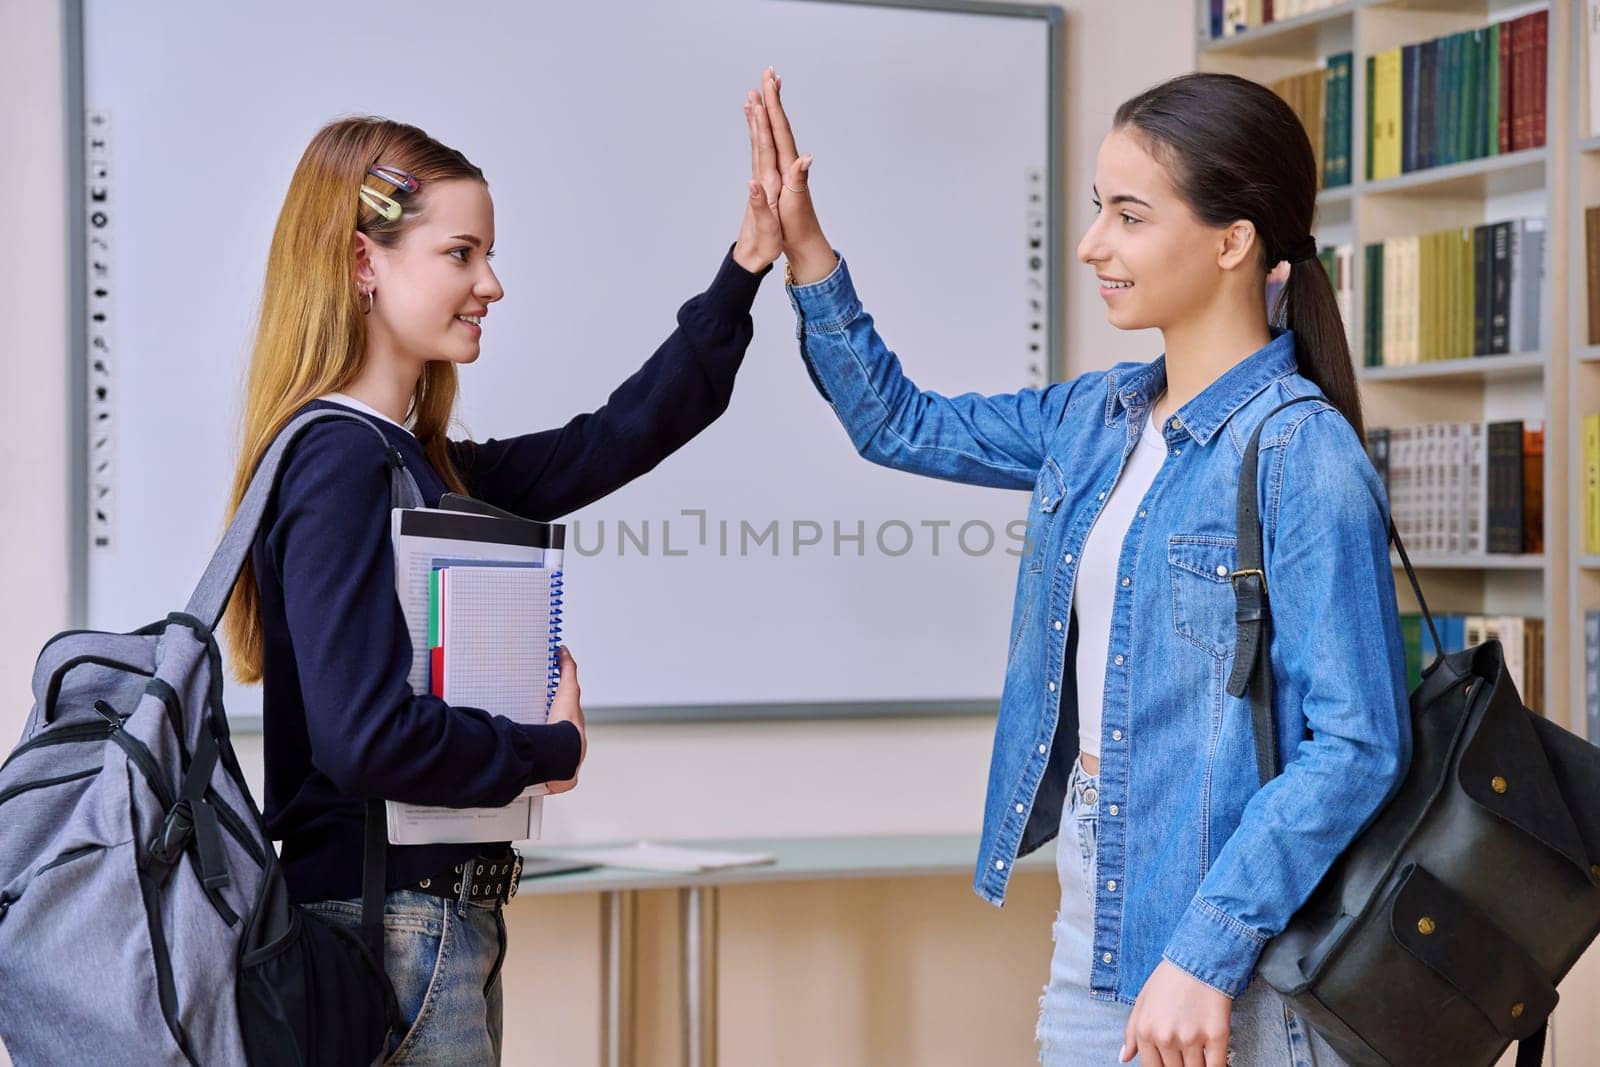 Teenage female students greeting high-fiving with hands in library class. Smiling teenagers from their classmates with textbooks and backpacks. High school education adolescence friendship communication concept